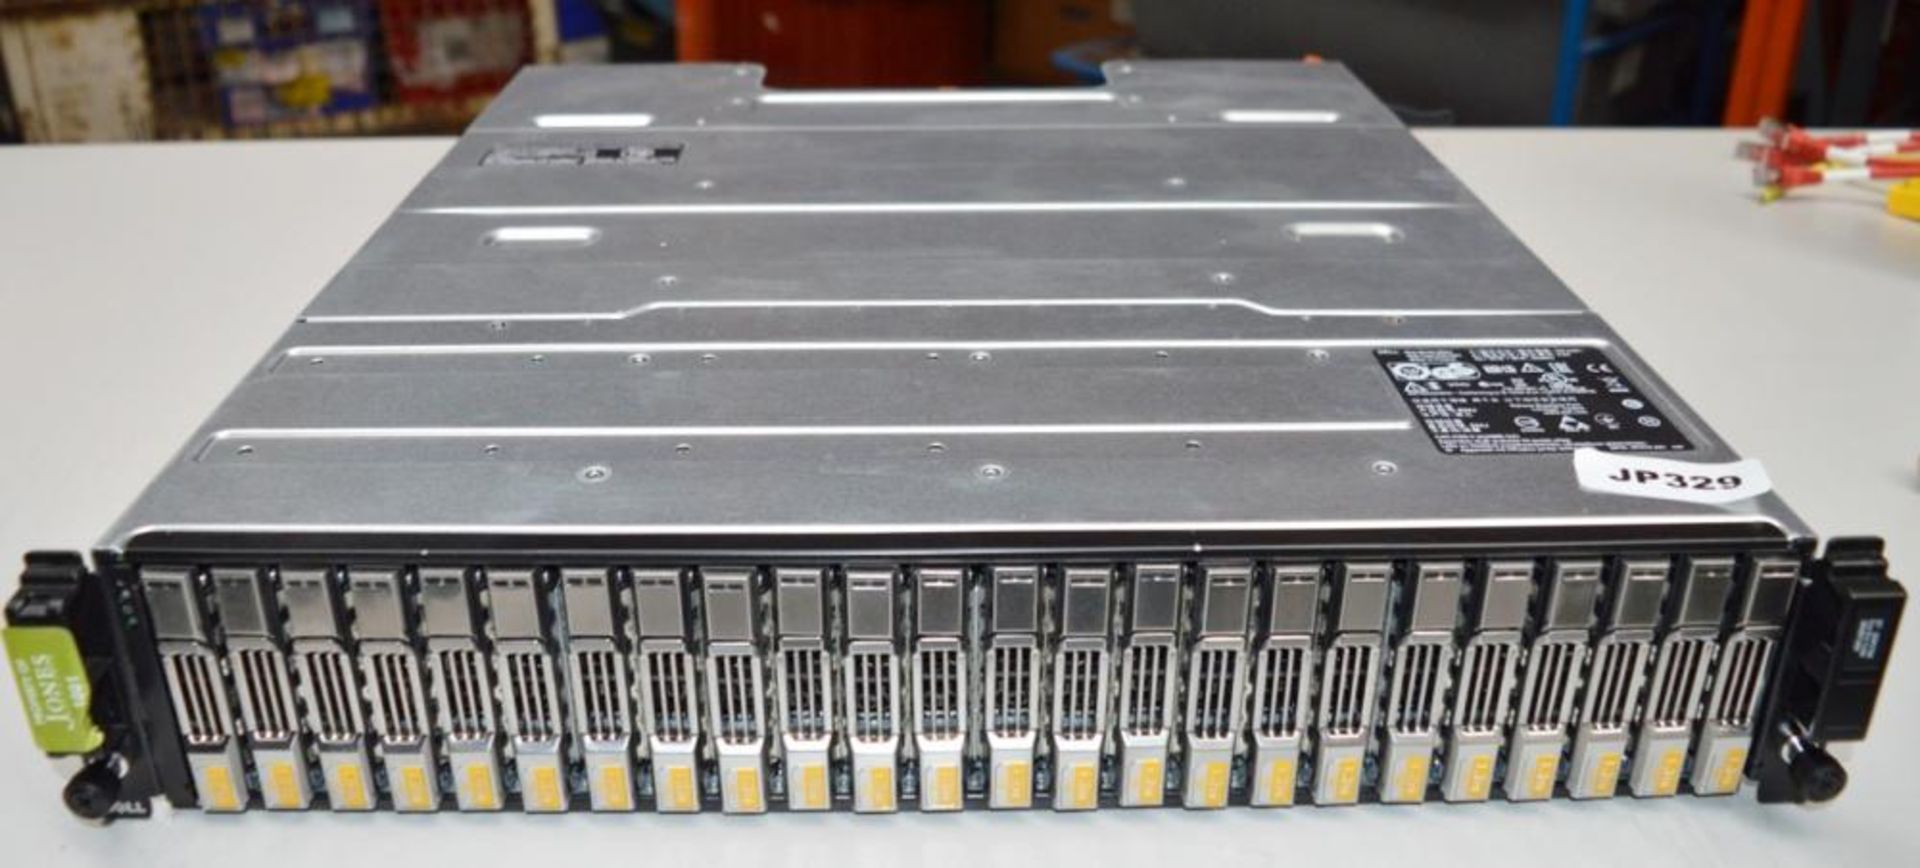 1 x Dell EqualLogic PS6210 Sans Storage Array With Dual 700w PSU's and 2 x EqualLogic 15 Modules - Image 4 of 6